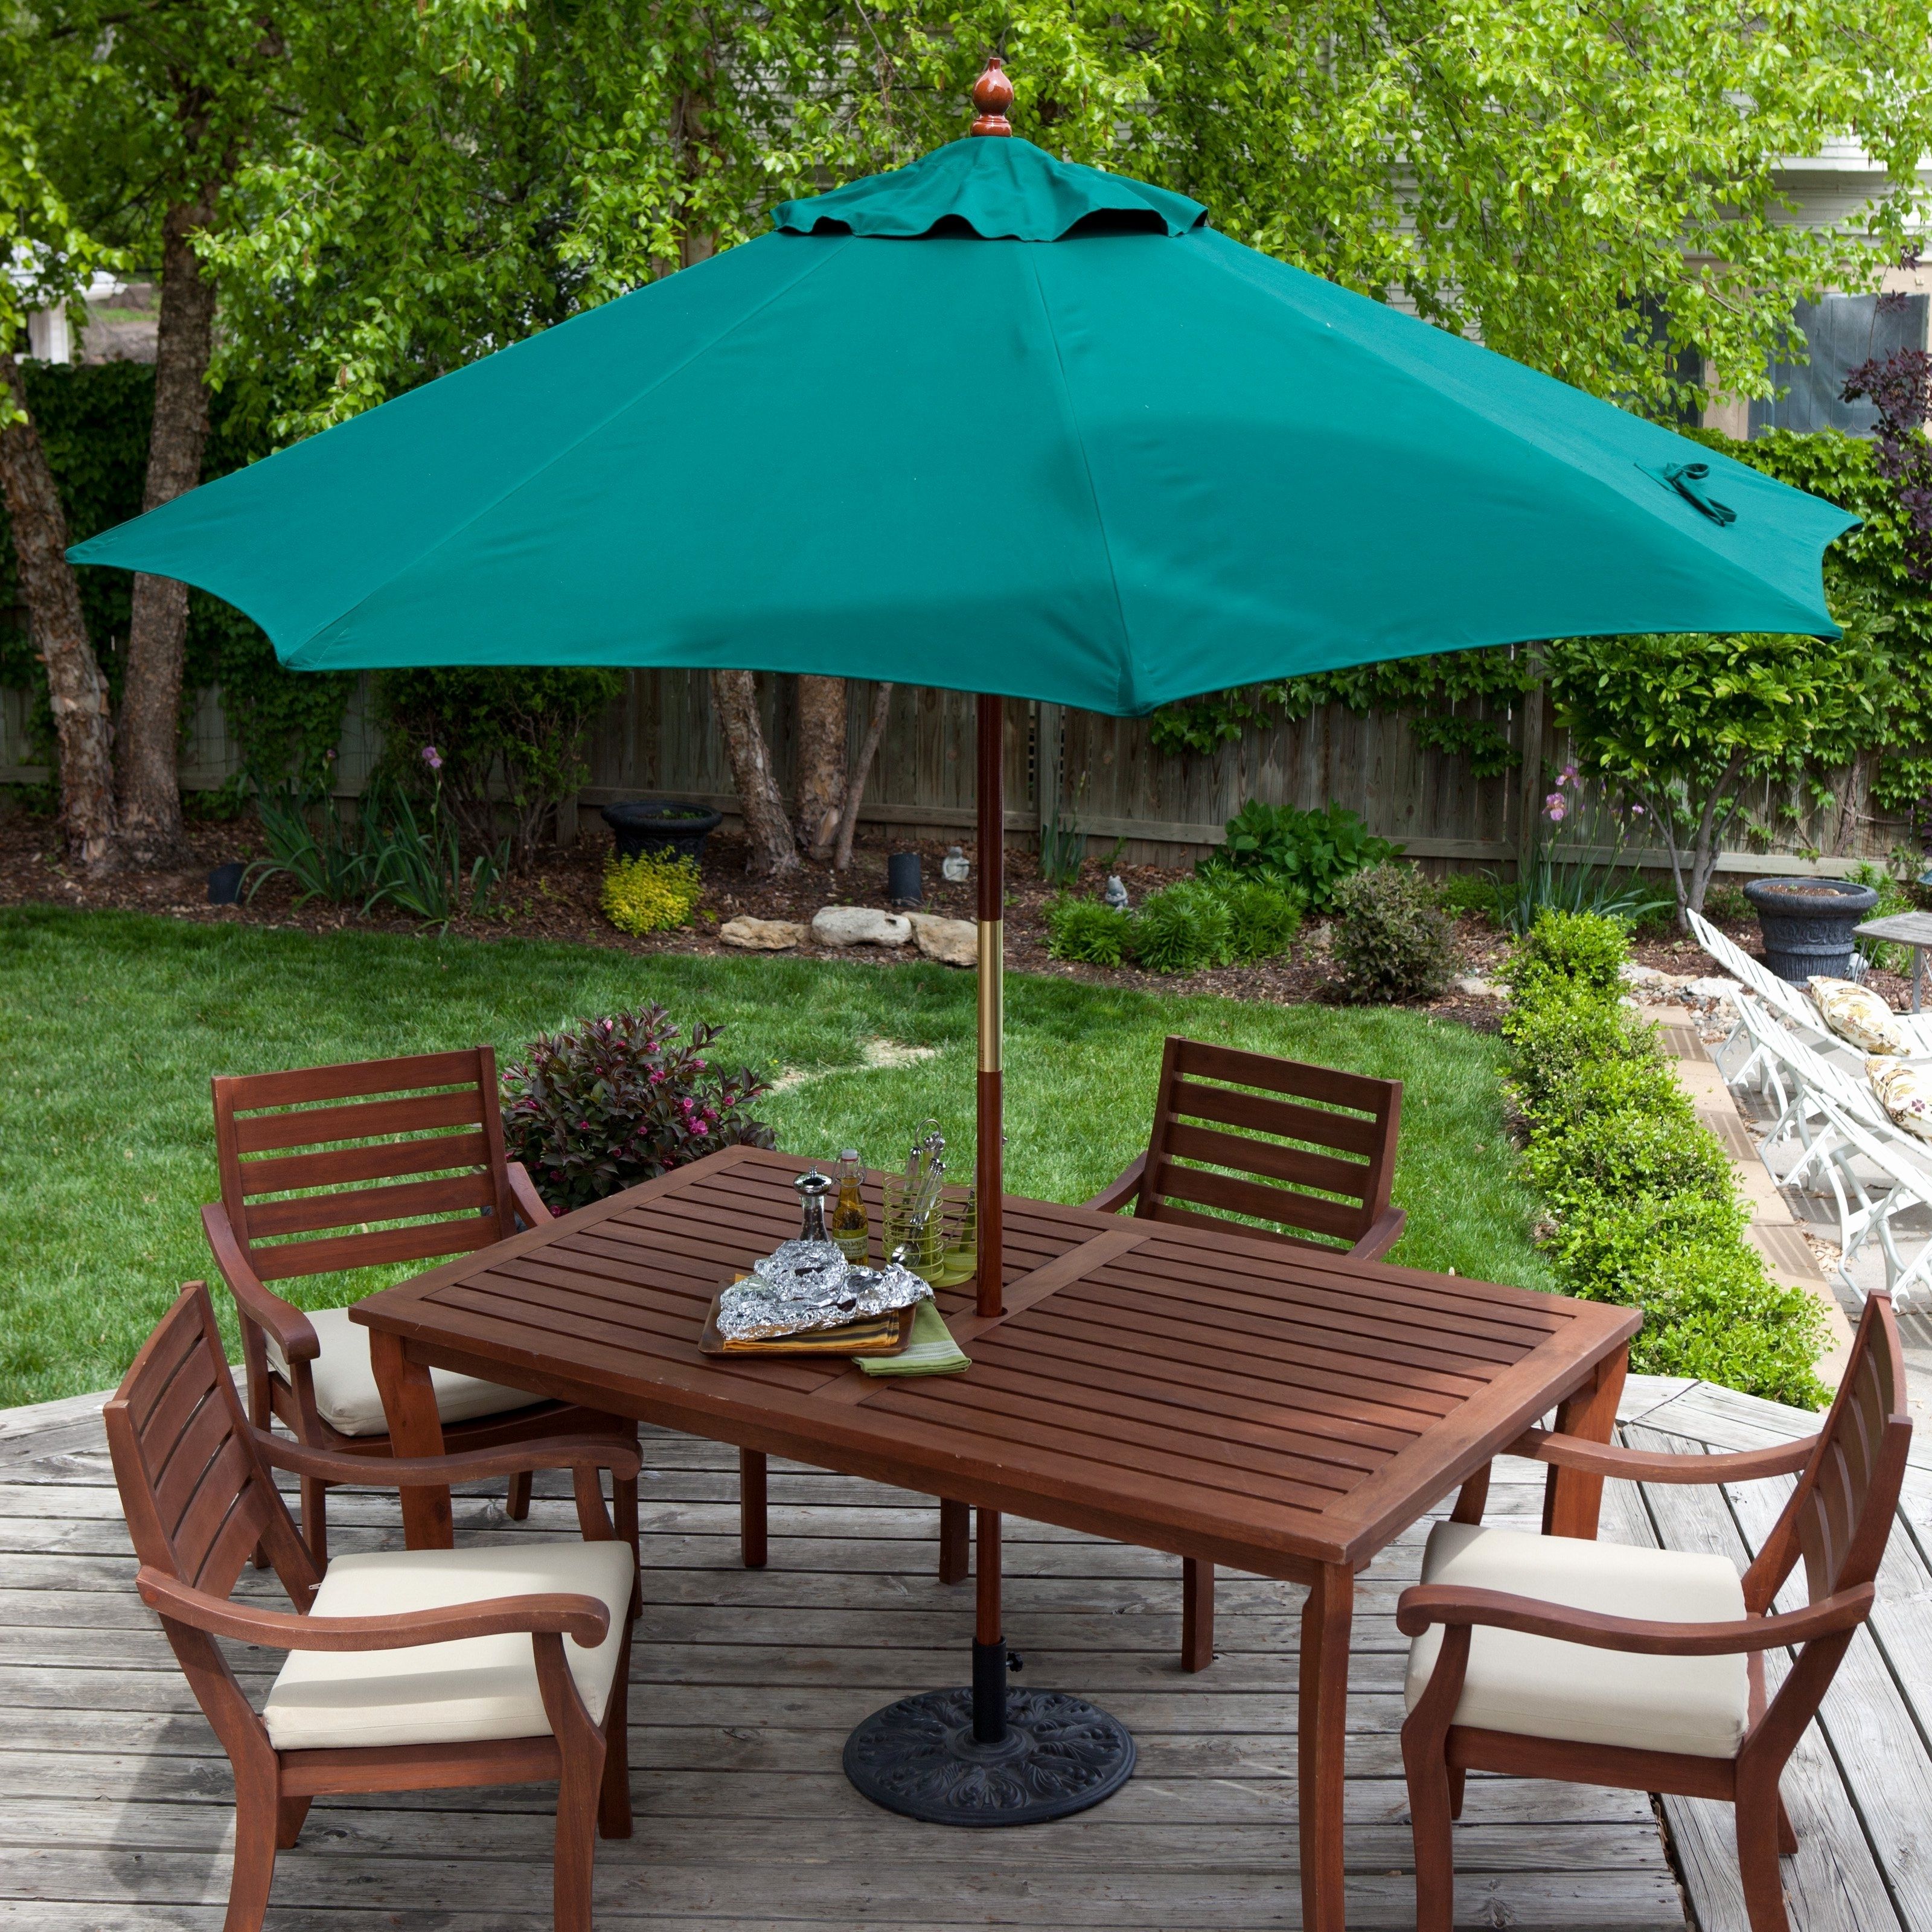 Favorite Patio Umbrellas With Table Pertaining To Umbrella For Outdoor Table Amazing Patio Chair With 6 Random  (View 9 of 20)